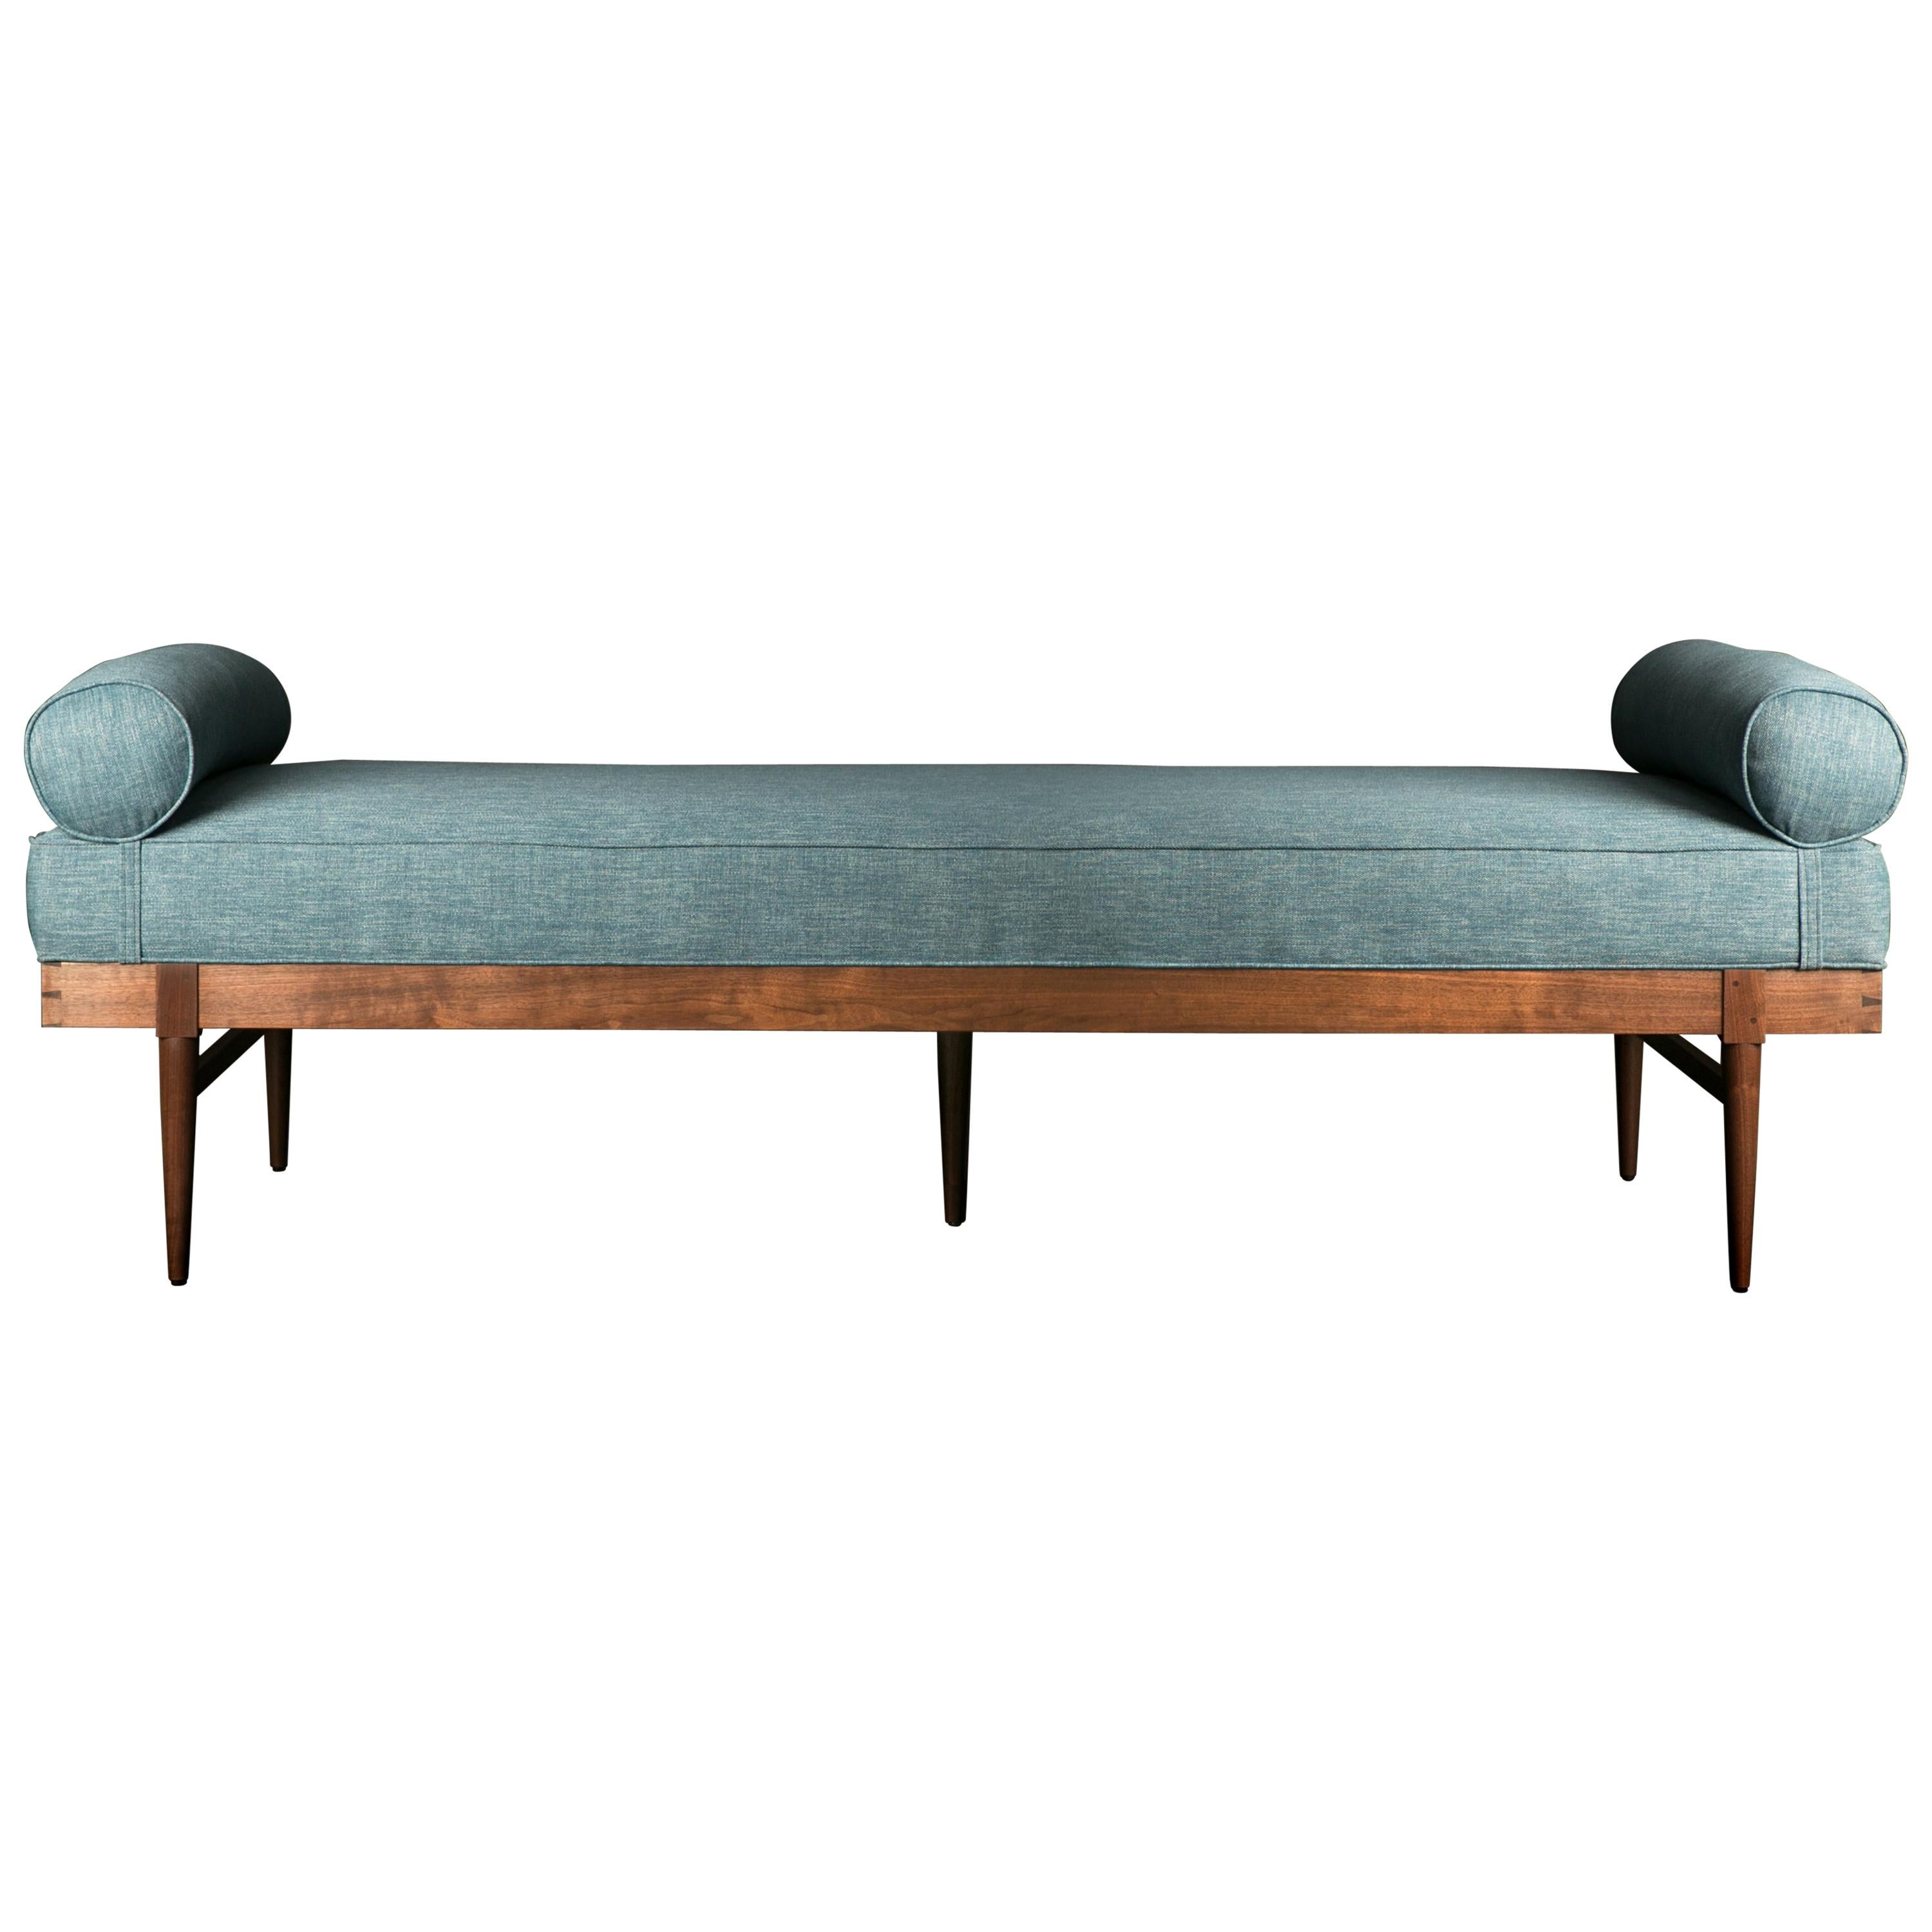 Upholstered Walnut Buchanan Daybed Twin Size with Dovetails and Turned Legs